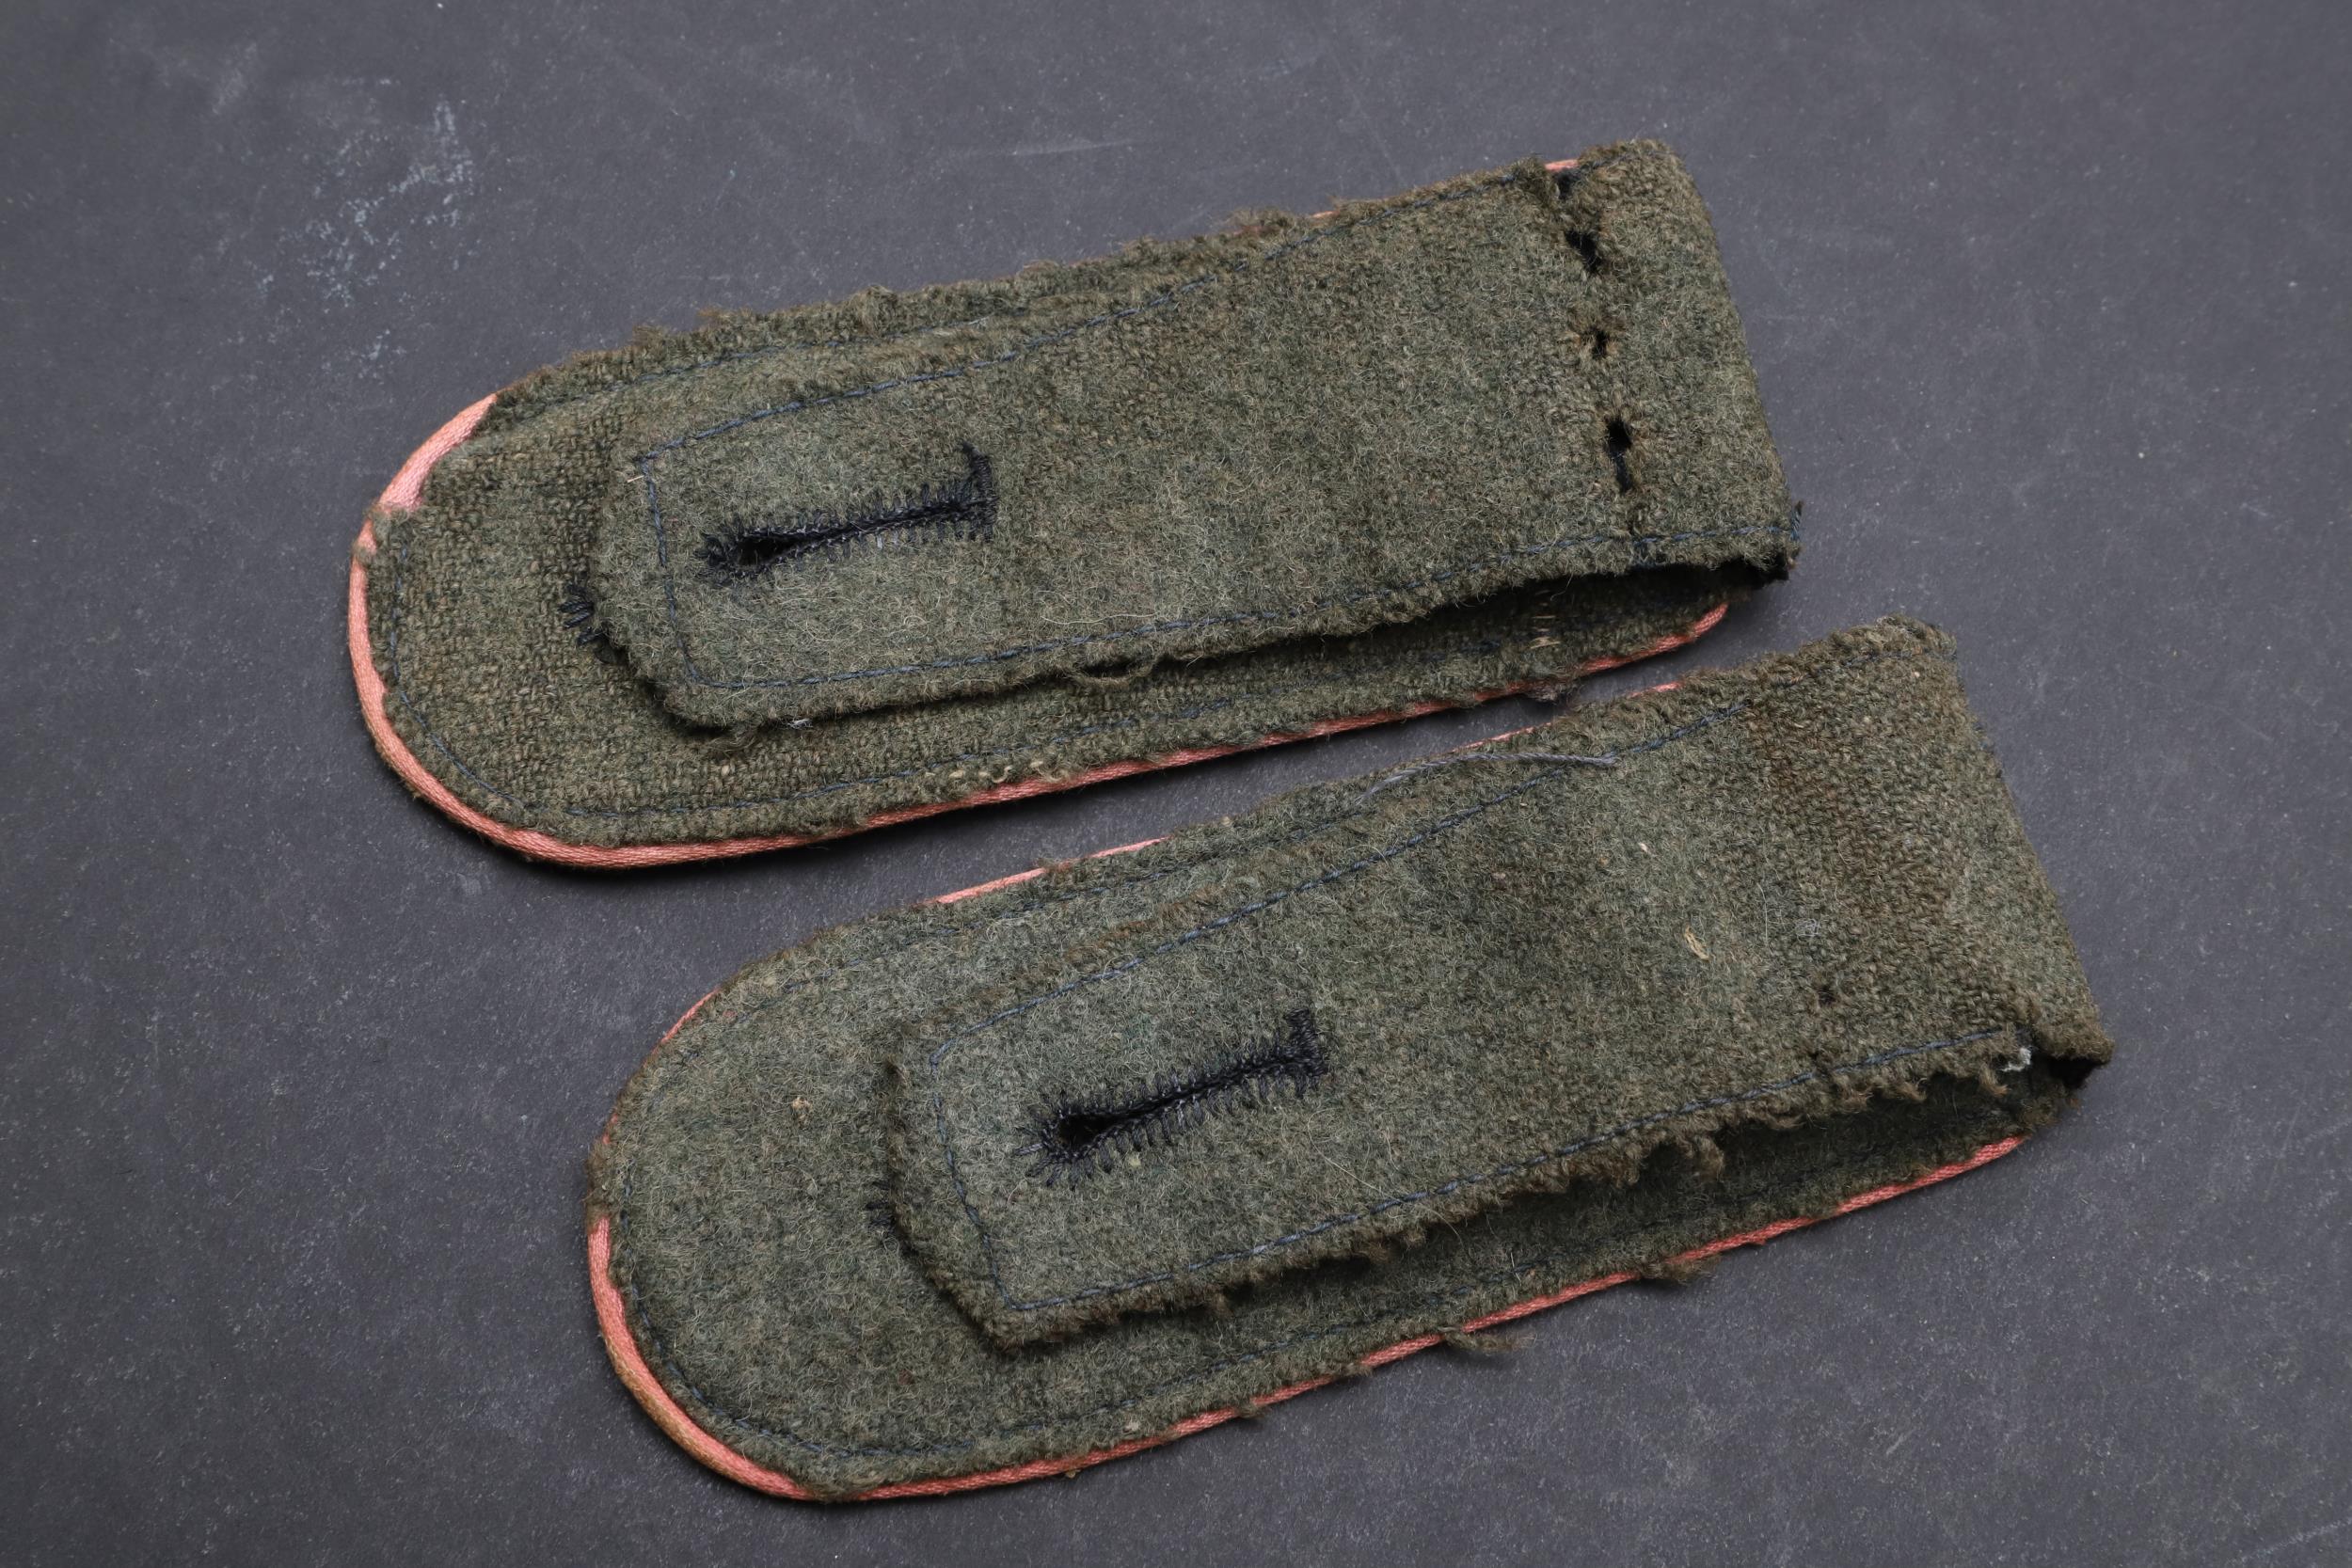 A PAIR OF SECOND WORLD WAR GERMAN PANZER OTHER RANK'S SHOULDER STRAPS. - Image 6 of 6